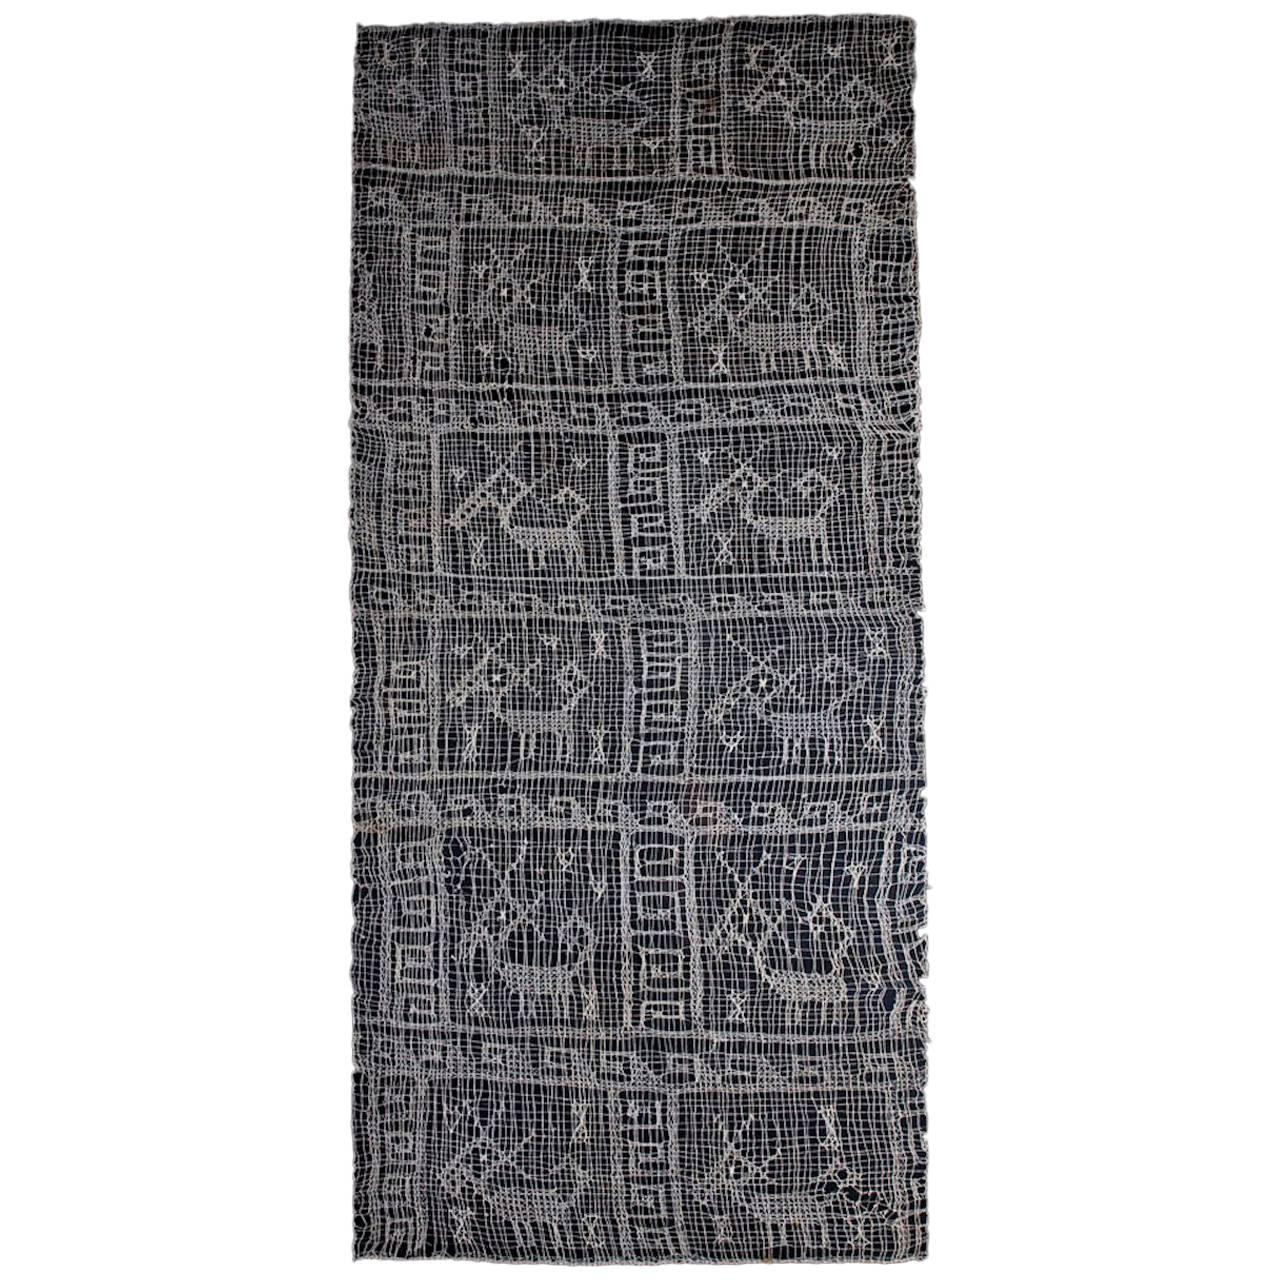 Pre-Columbian Chancay Gauze Textile with 12 Animals, Ex-Kate Kemper